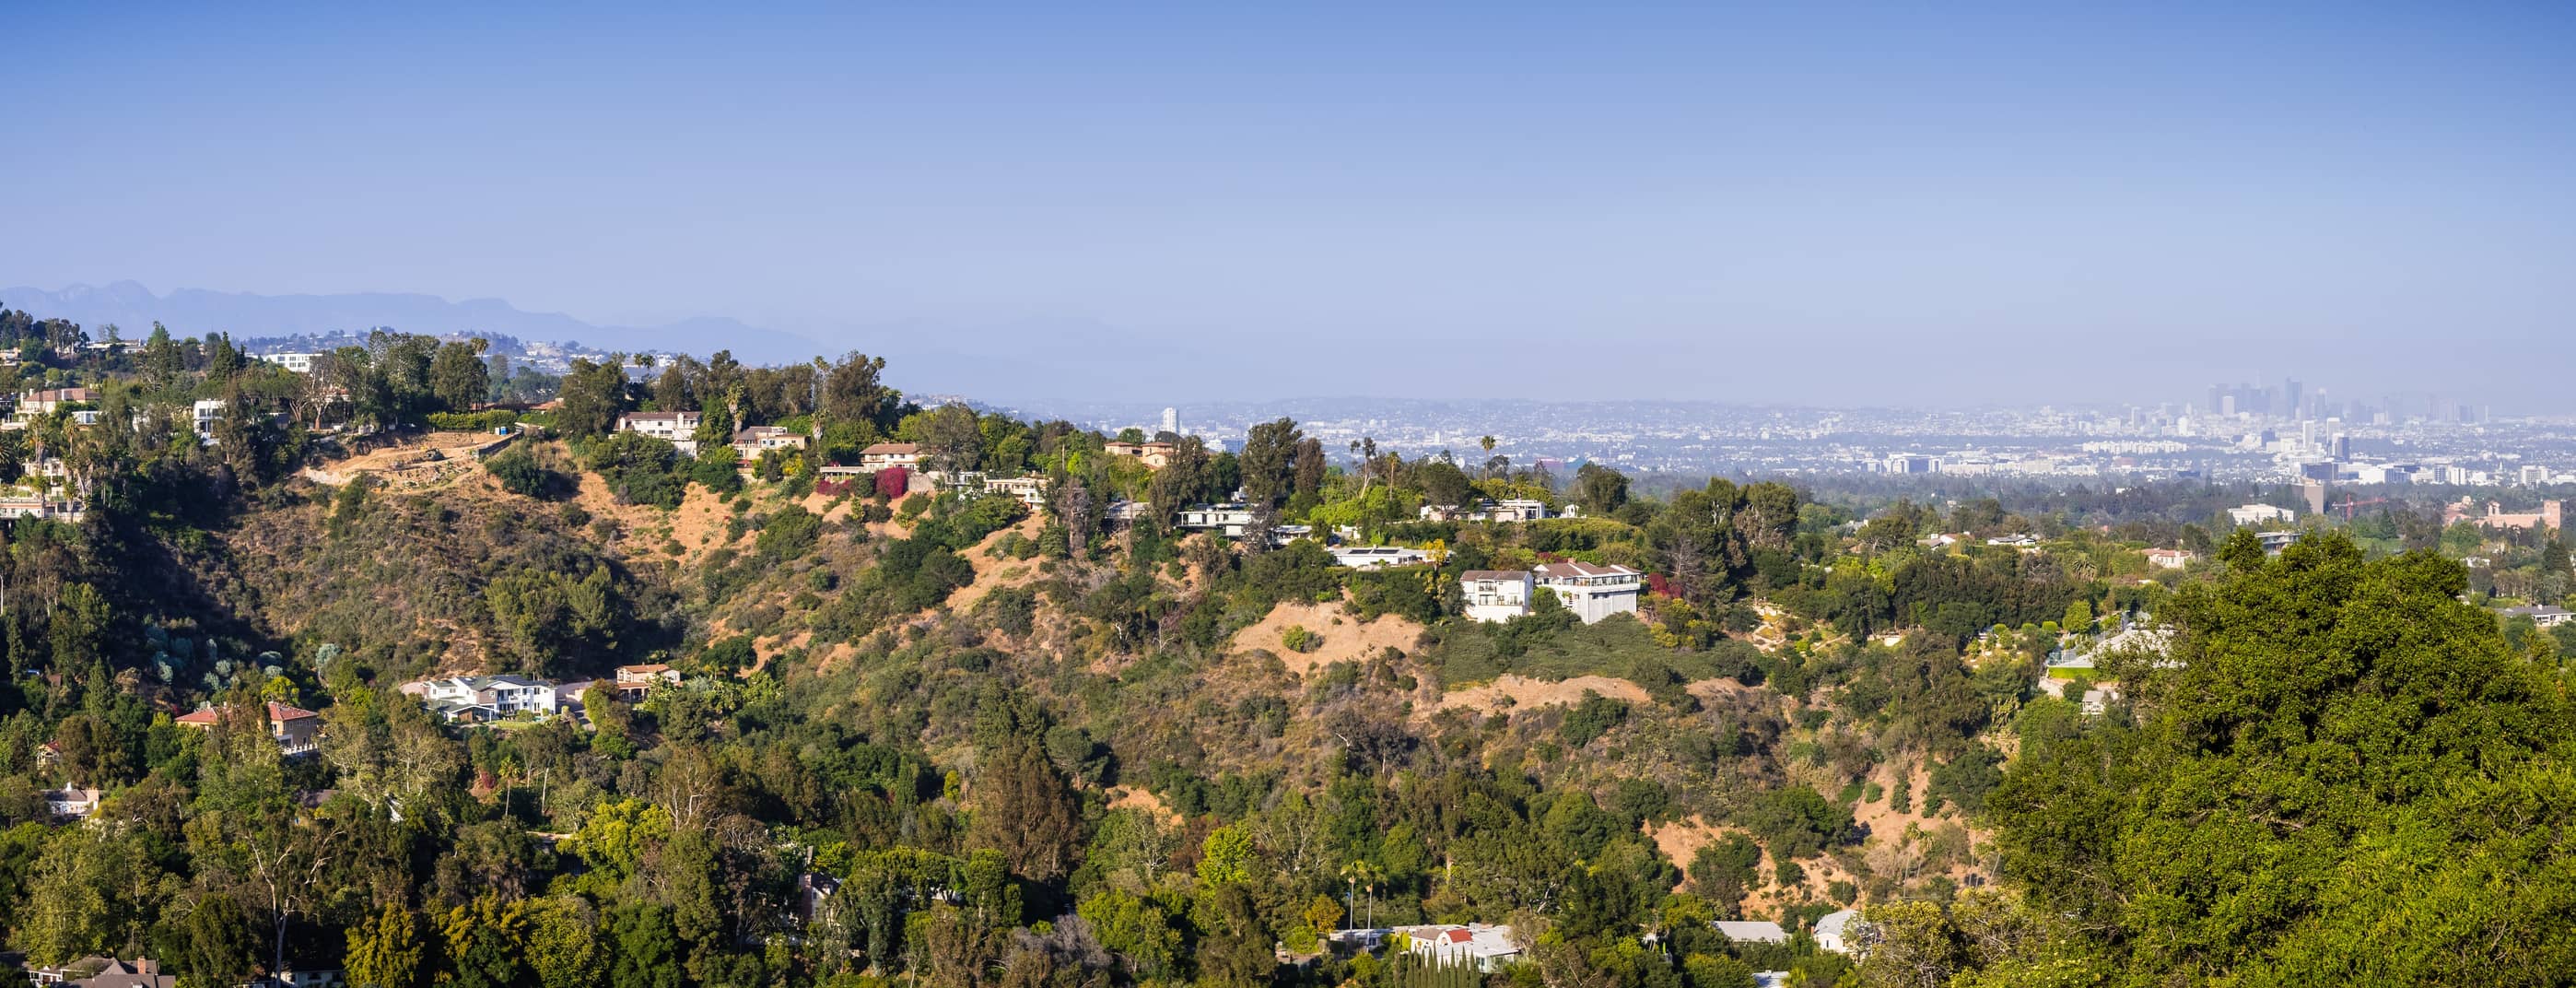 scattered-mansions-on-one-of-the-hills-of-bel-air-neighborhood-the-downtown-skyscrapers-visible-in-the-background-through-a-hazy-atmosphere-los-angeles-california